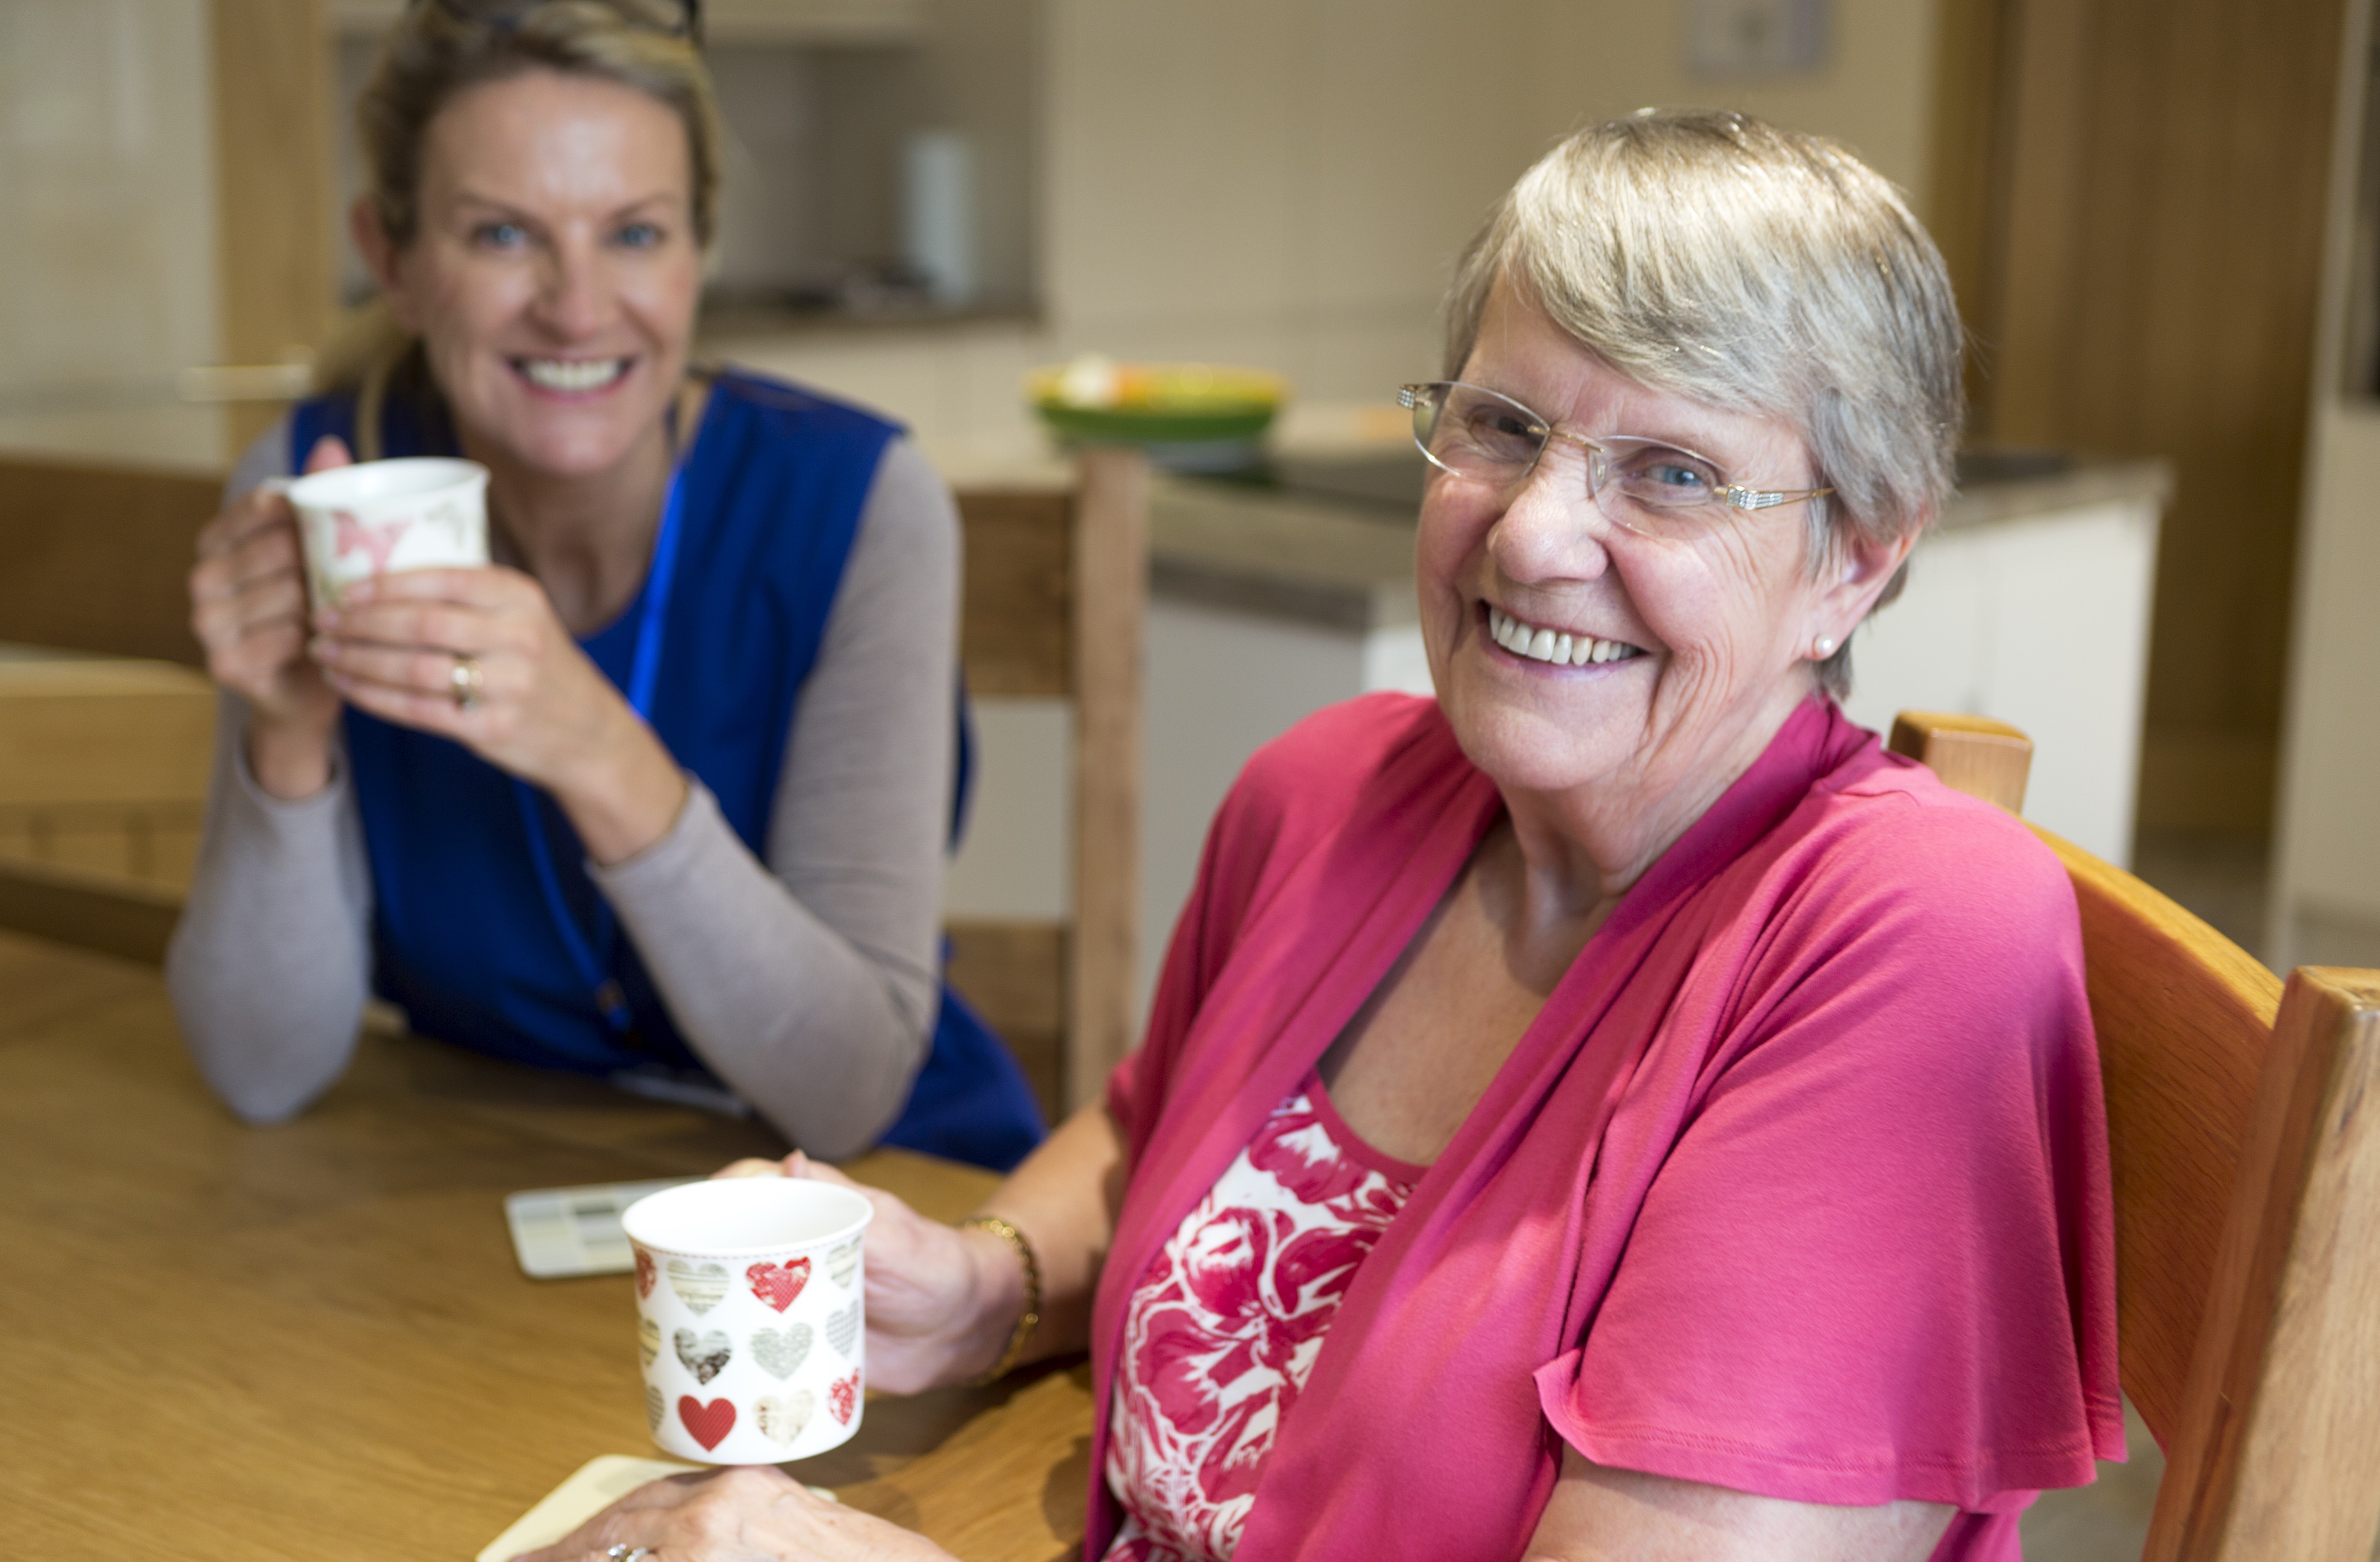 Watford Community Housing achieves Independent Living Standards accreditation  